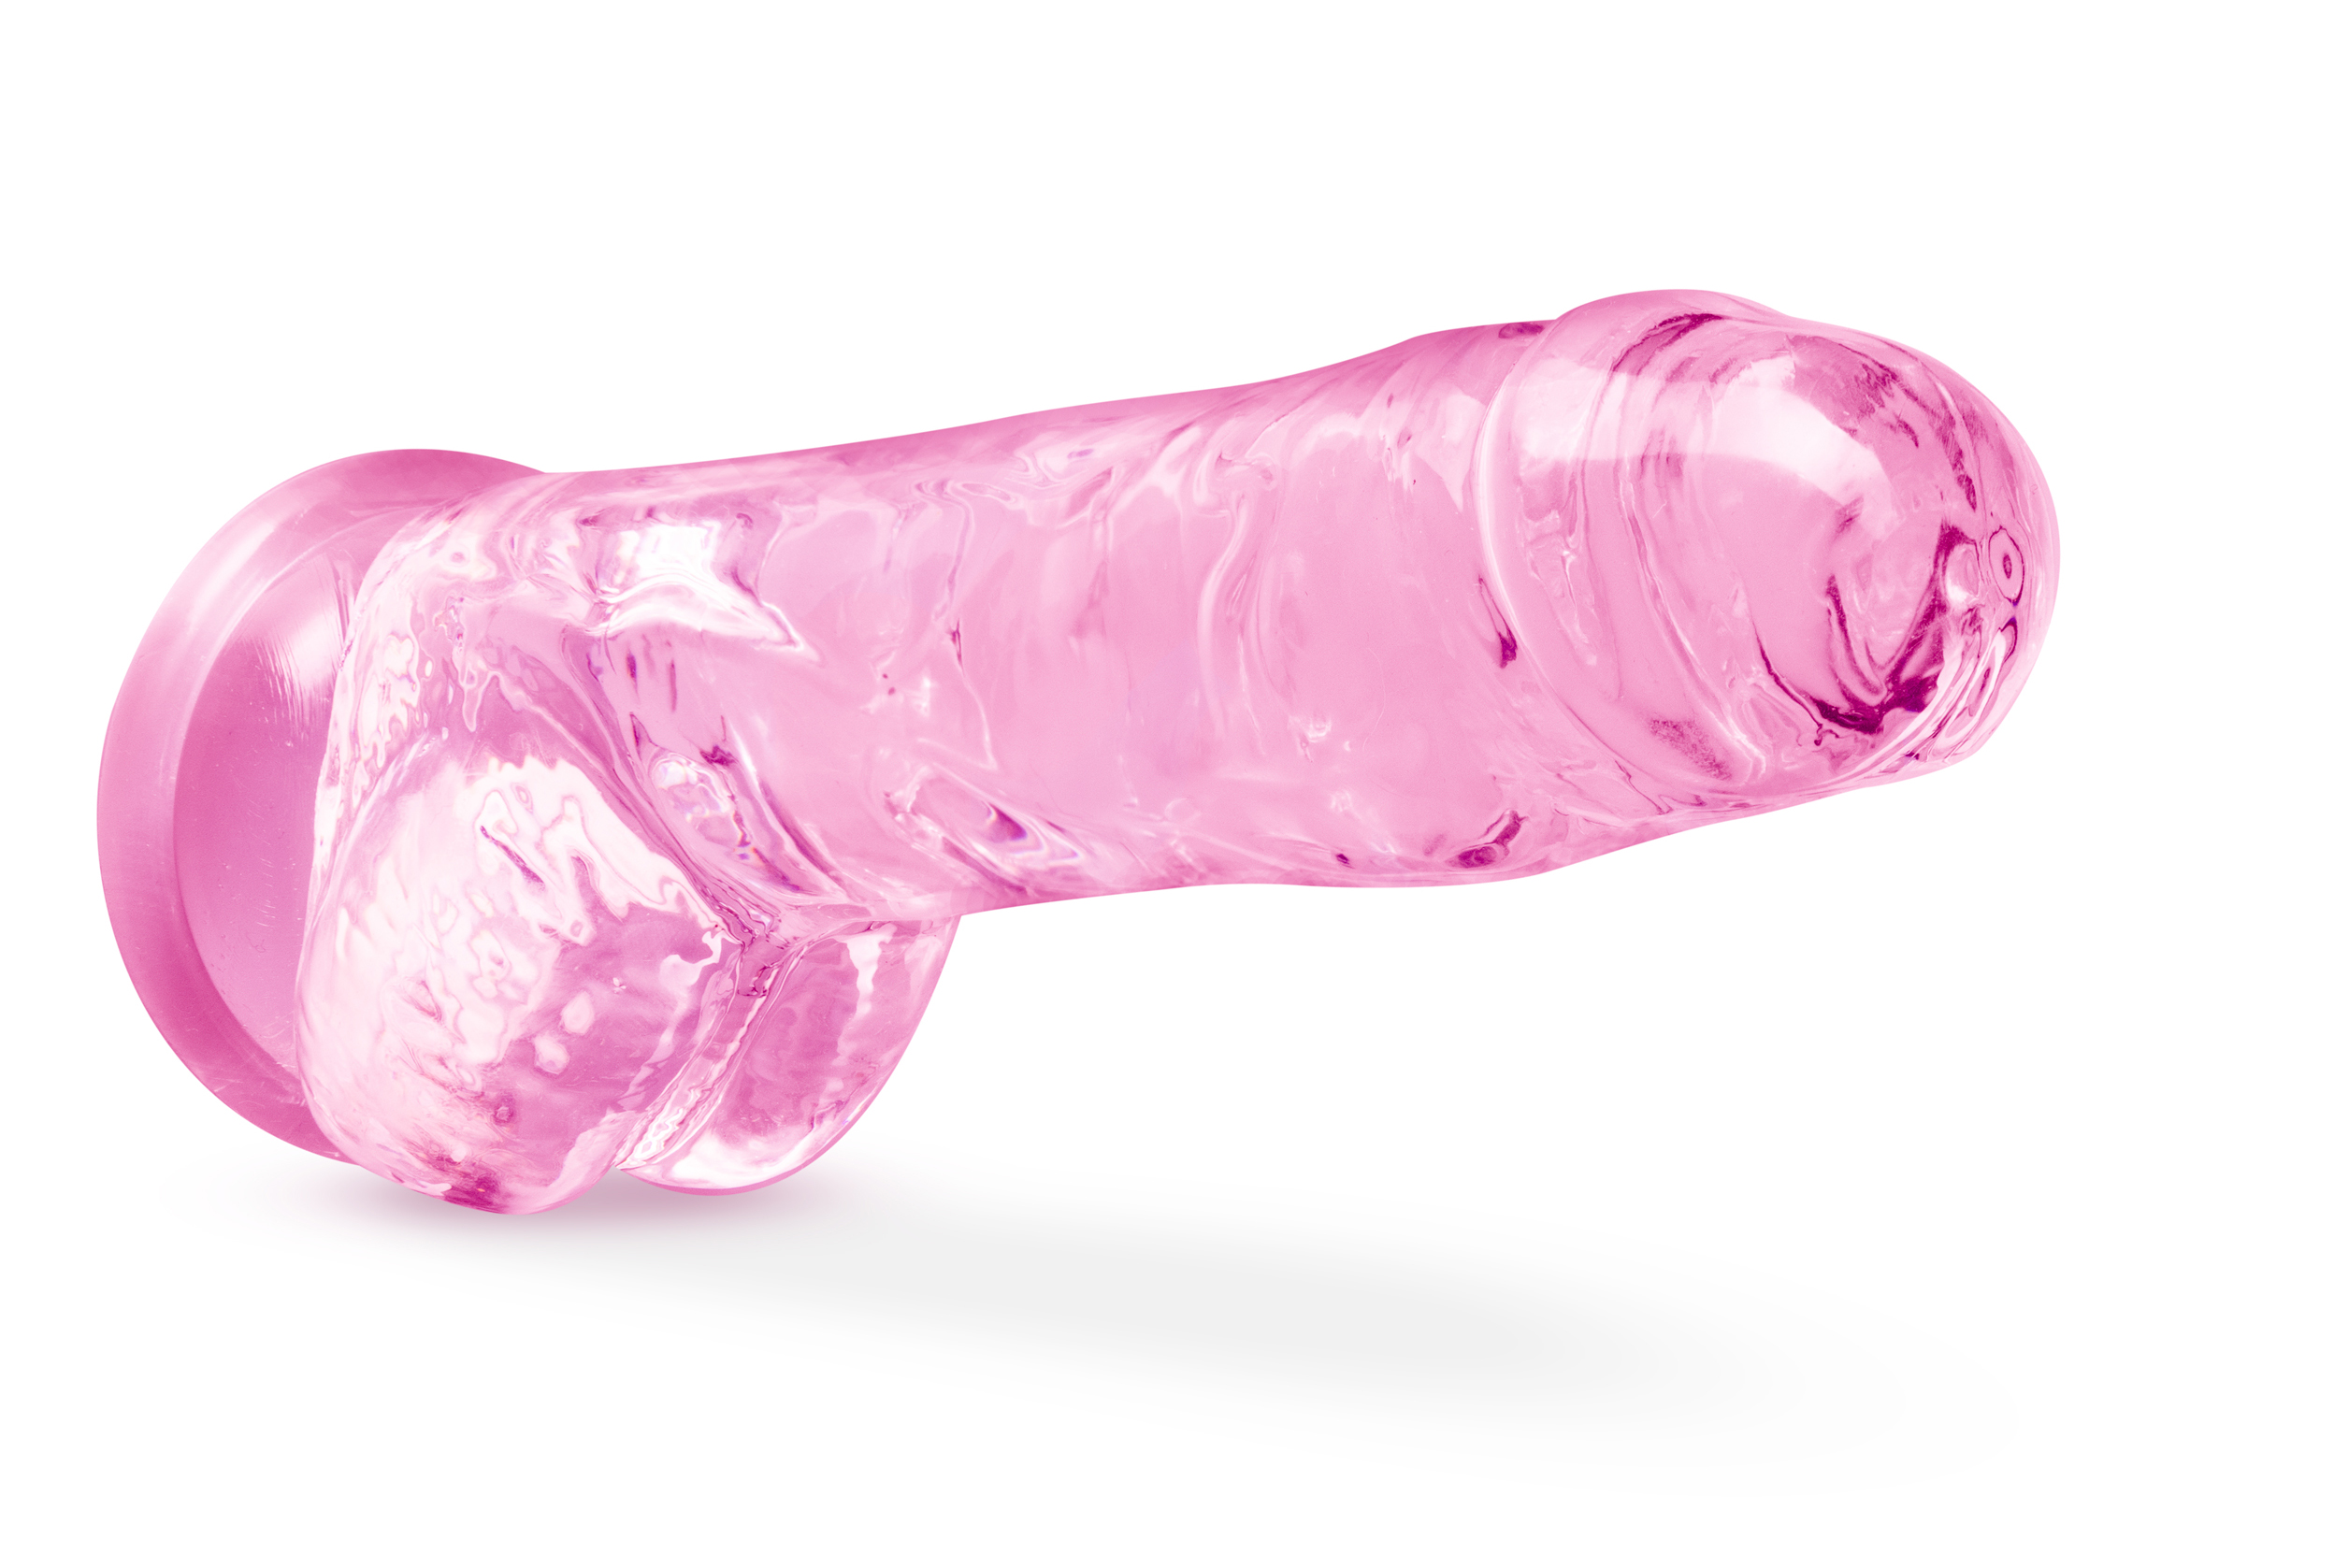 naturally yours  inch crystalline dildo rose 